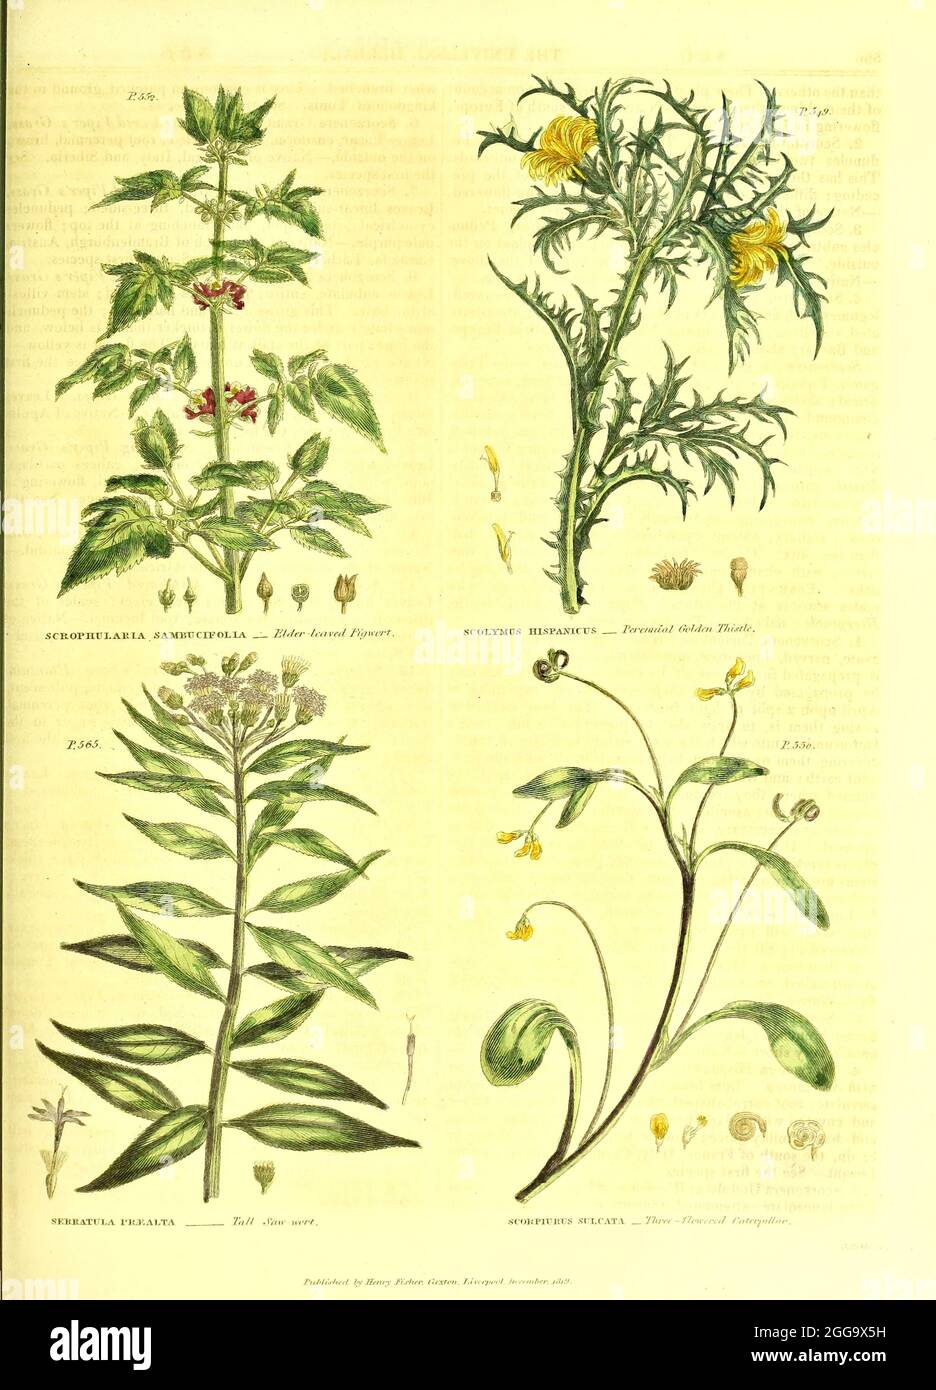 Scrophularia samnucifolia [Elder-leaved Figwort], Scolymus hispanicus [Peruvian Golden Thistle] Serratula praealta [Tall Saw-wort] Scorpiurus sulcata [Three-Flowered Caterpillar] from Vol II of the book The universal herbal : or botanical, medical and agricultural dictionary : containing an account of all known plants in the world, arranged according to the Linnean system. Specifying the uses to which they are or may be applied By Thomas Green,  Published in 1816 by Nuttall, Fisher & Co. in Liverpool and Printed at the Caxton Press by H. Fisher Stock Photo